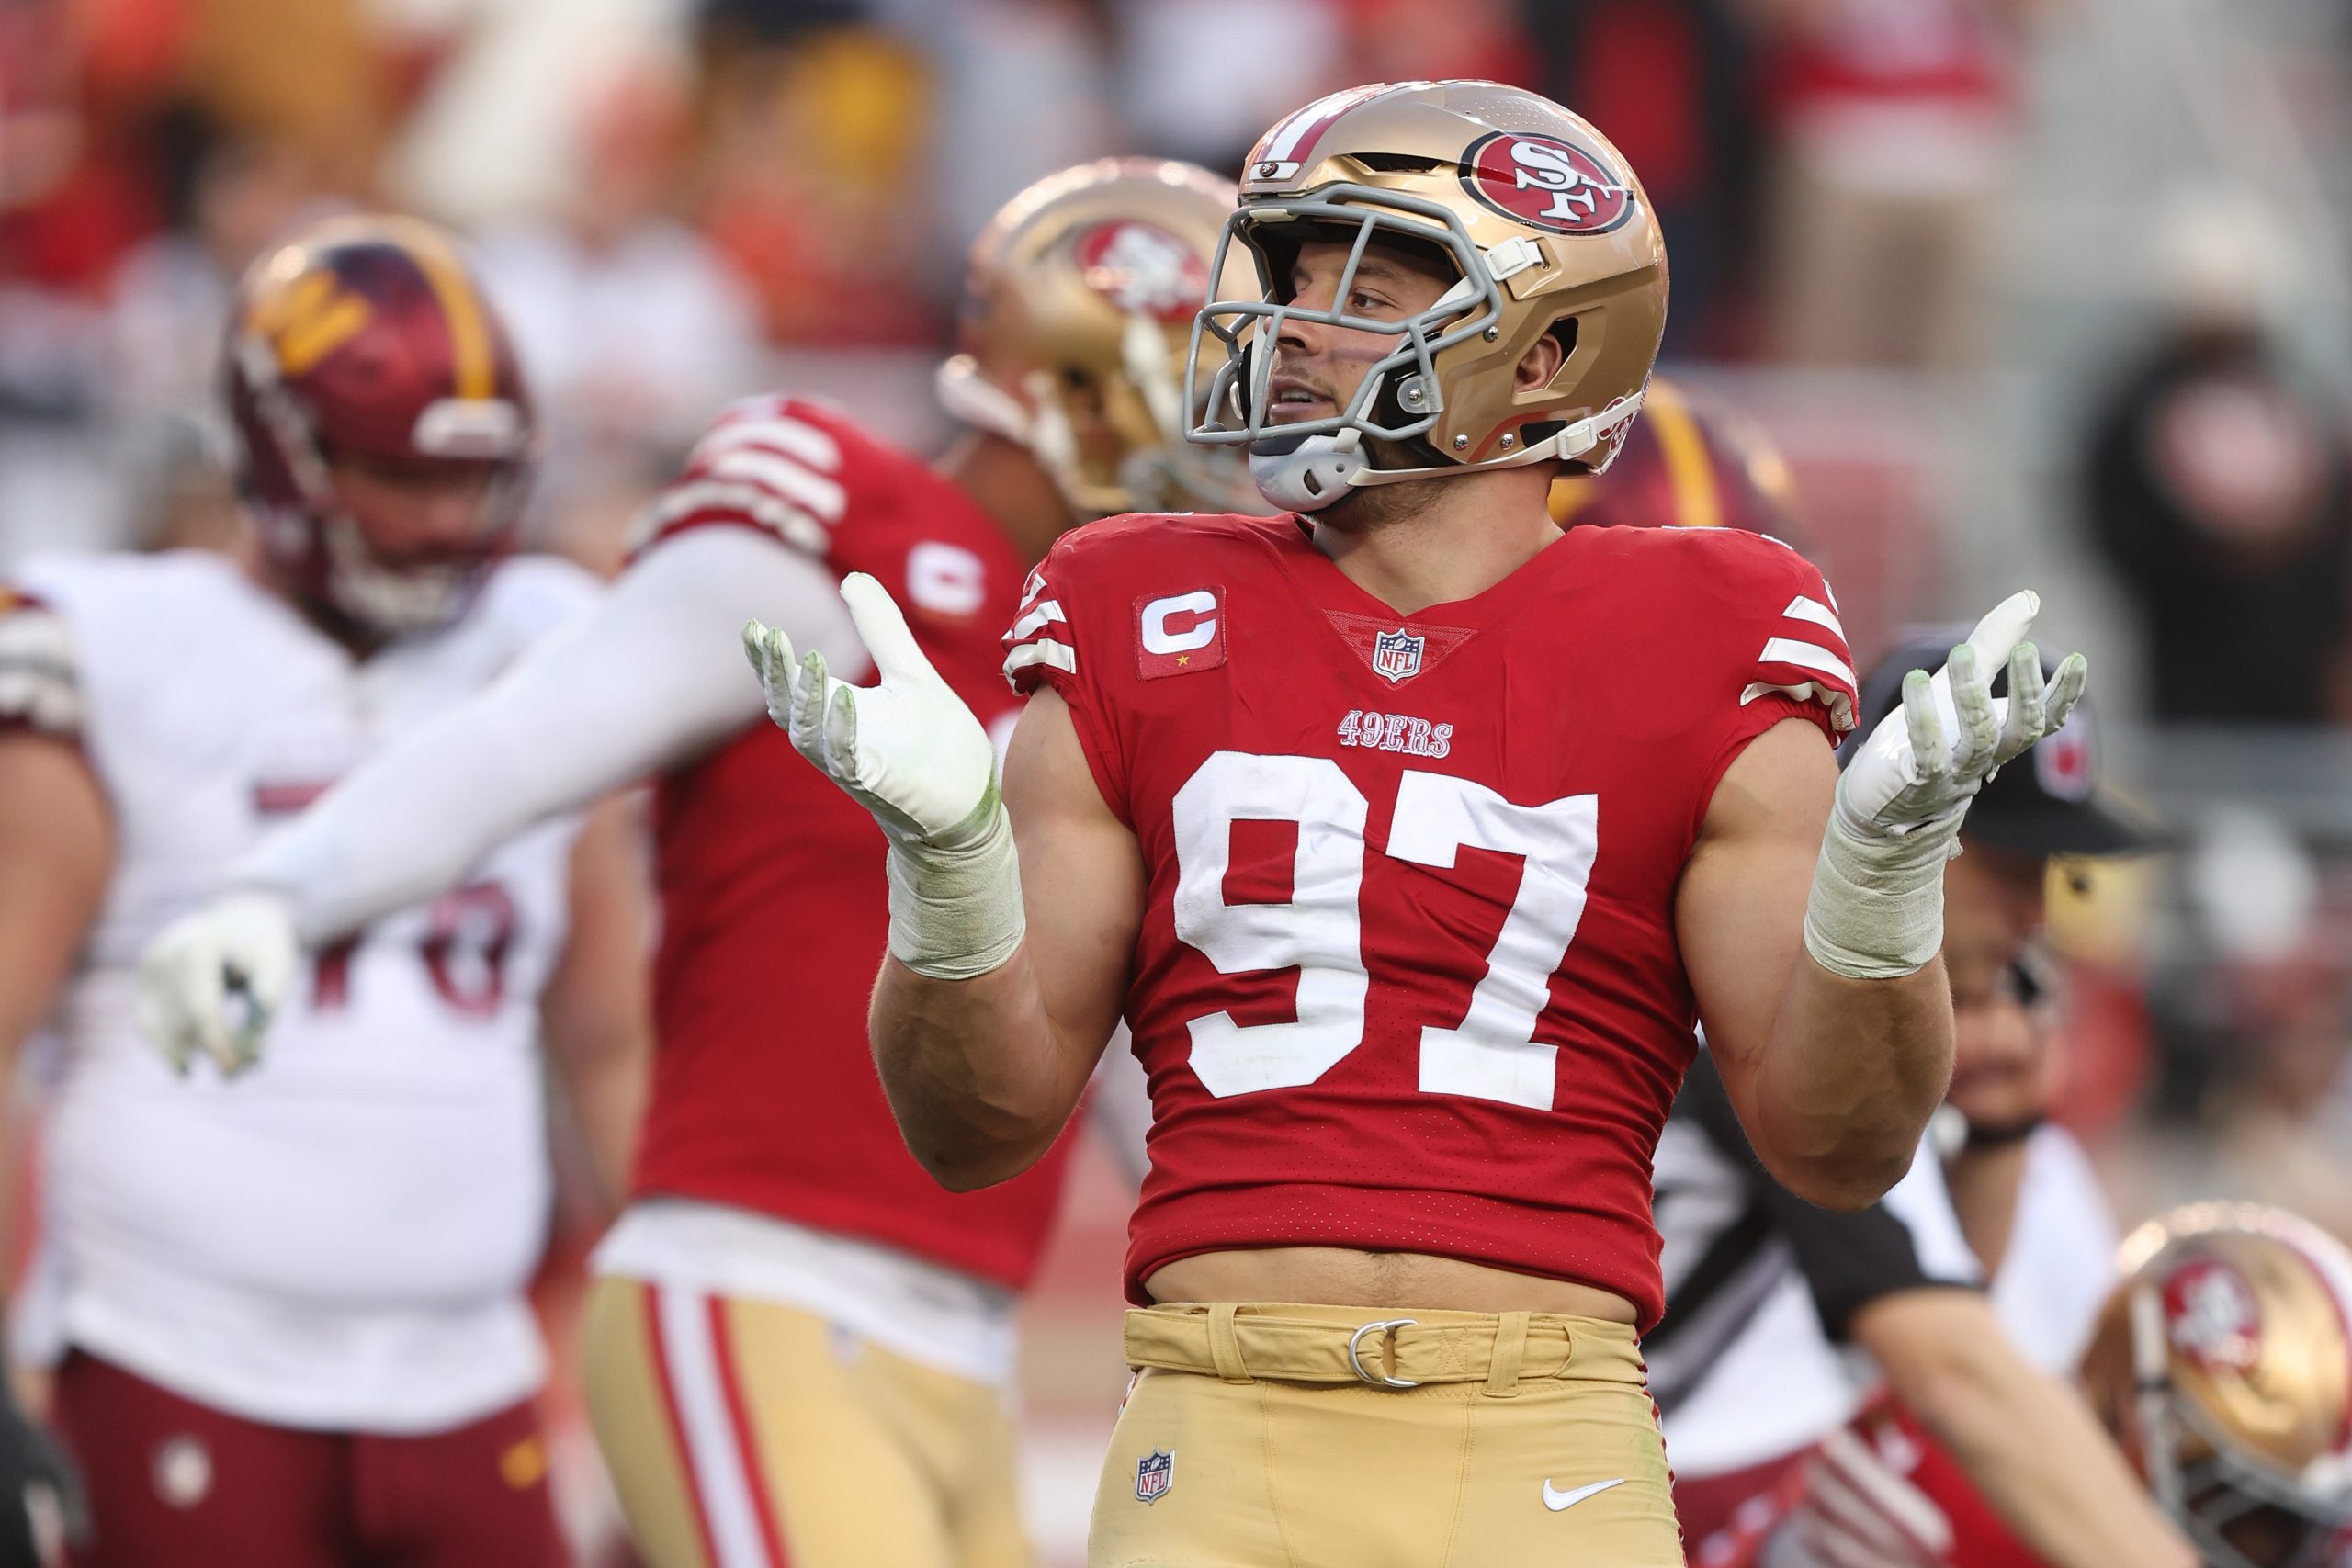 Twitter loses its mind after George Kittle catch vs. Cowboys